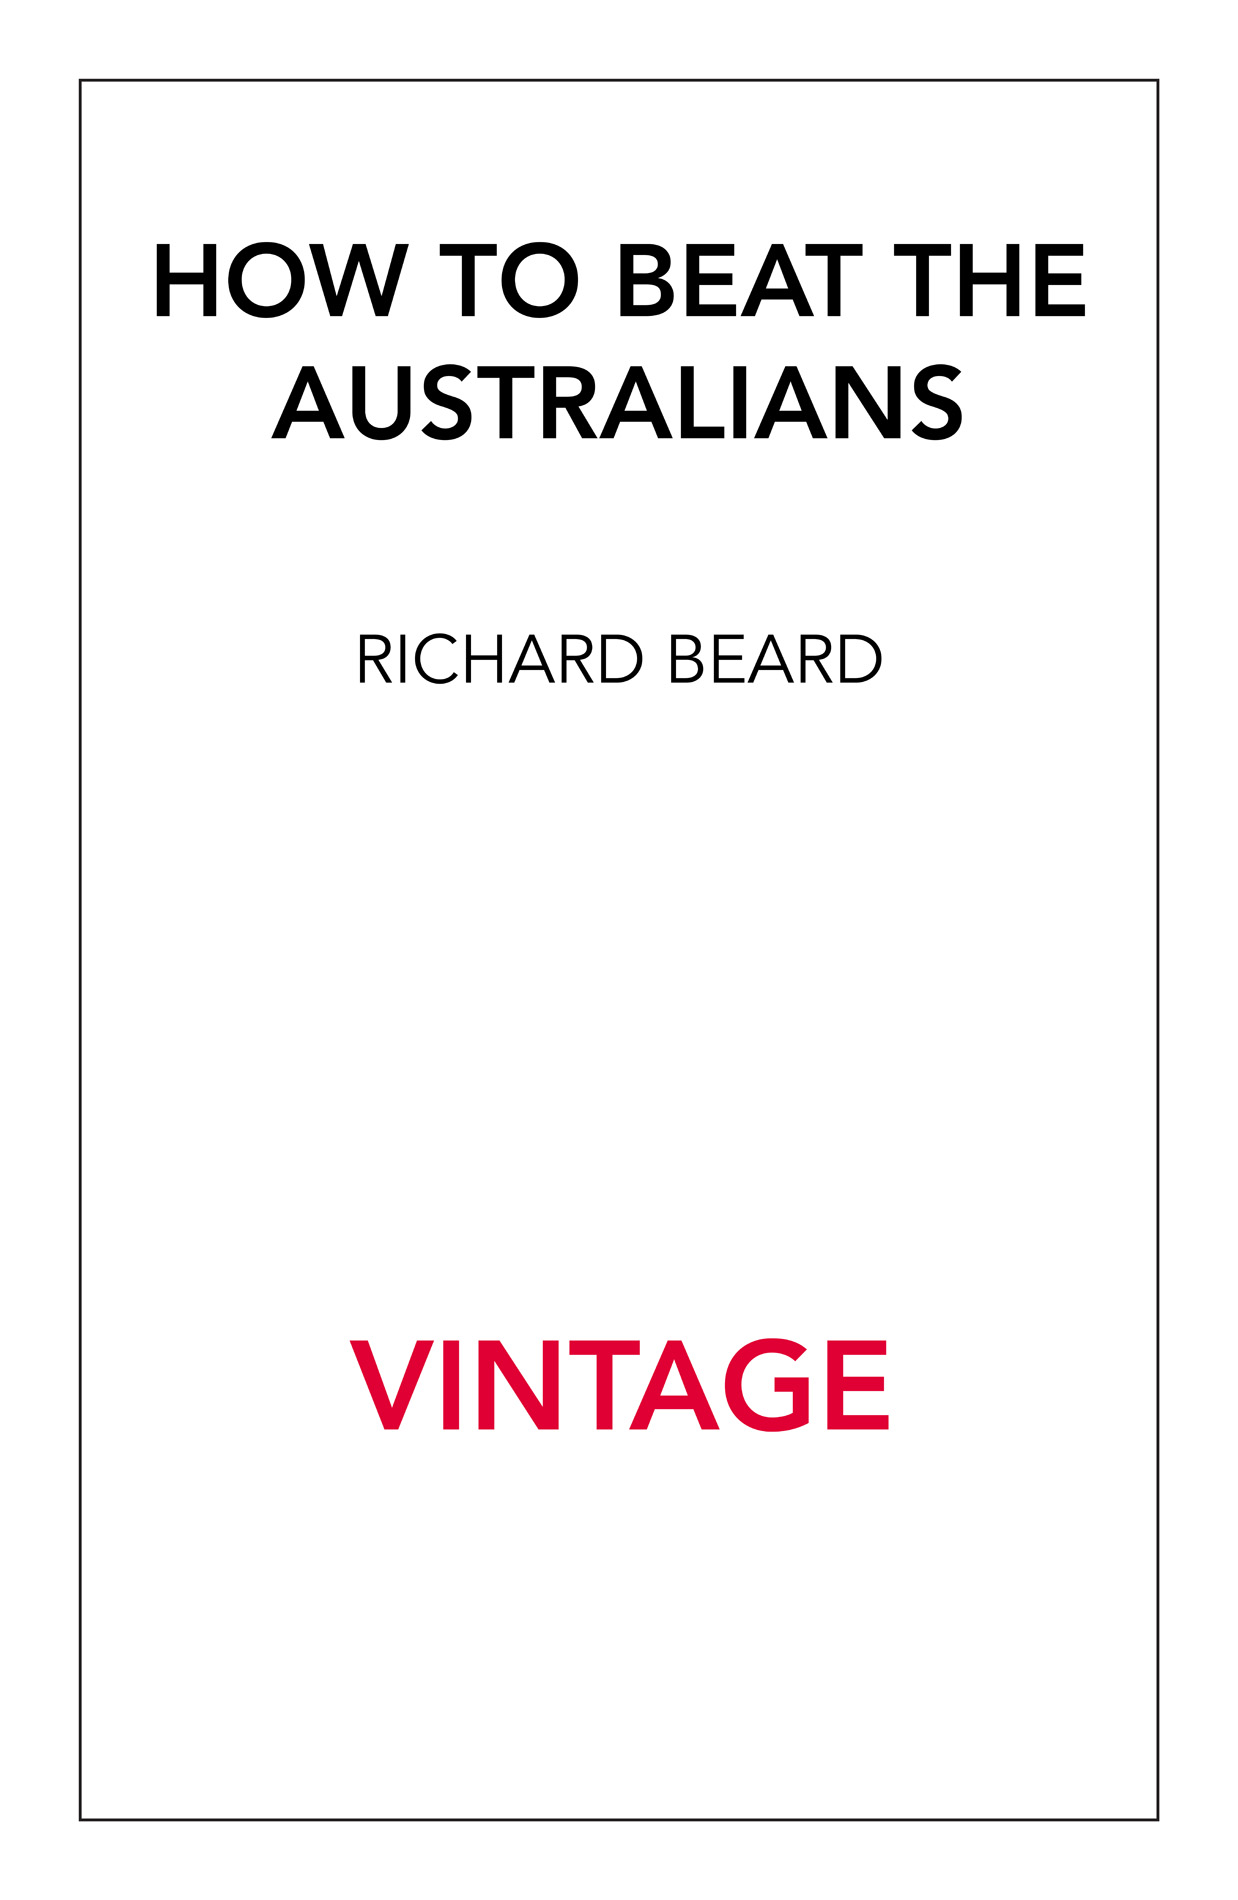 Contents Contents About the Author Richard Beards most recent book is Acts - photo 1